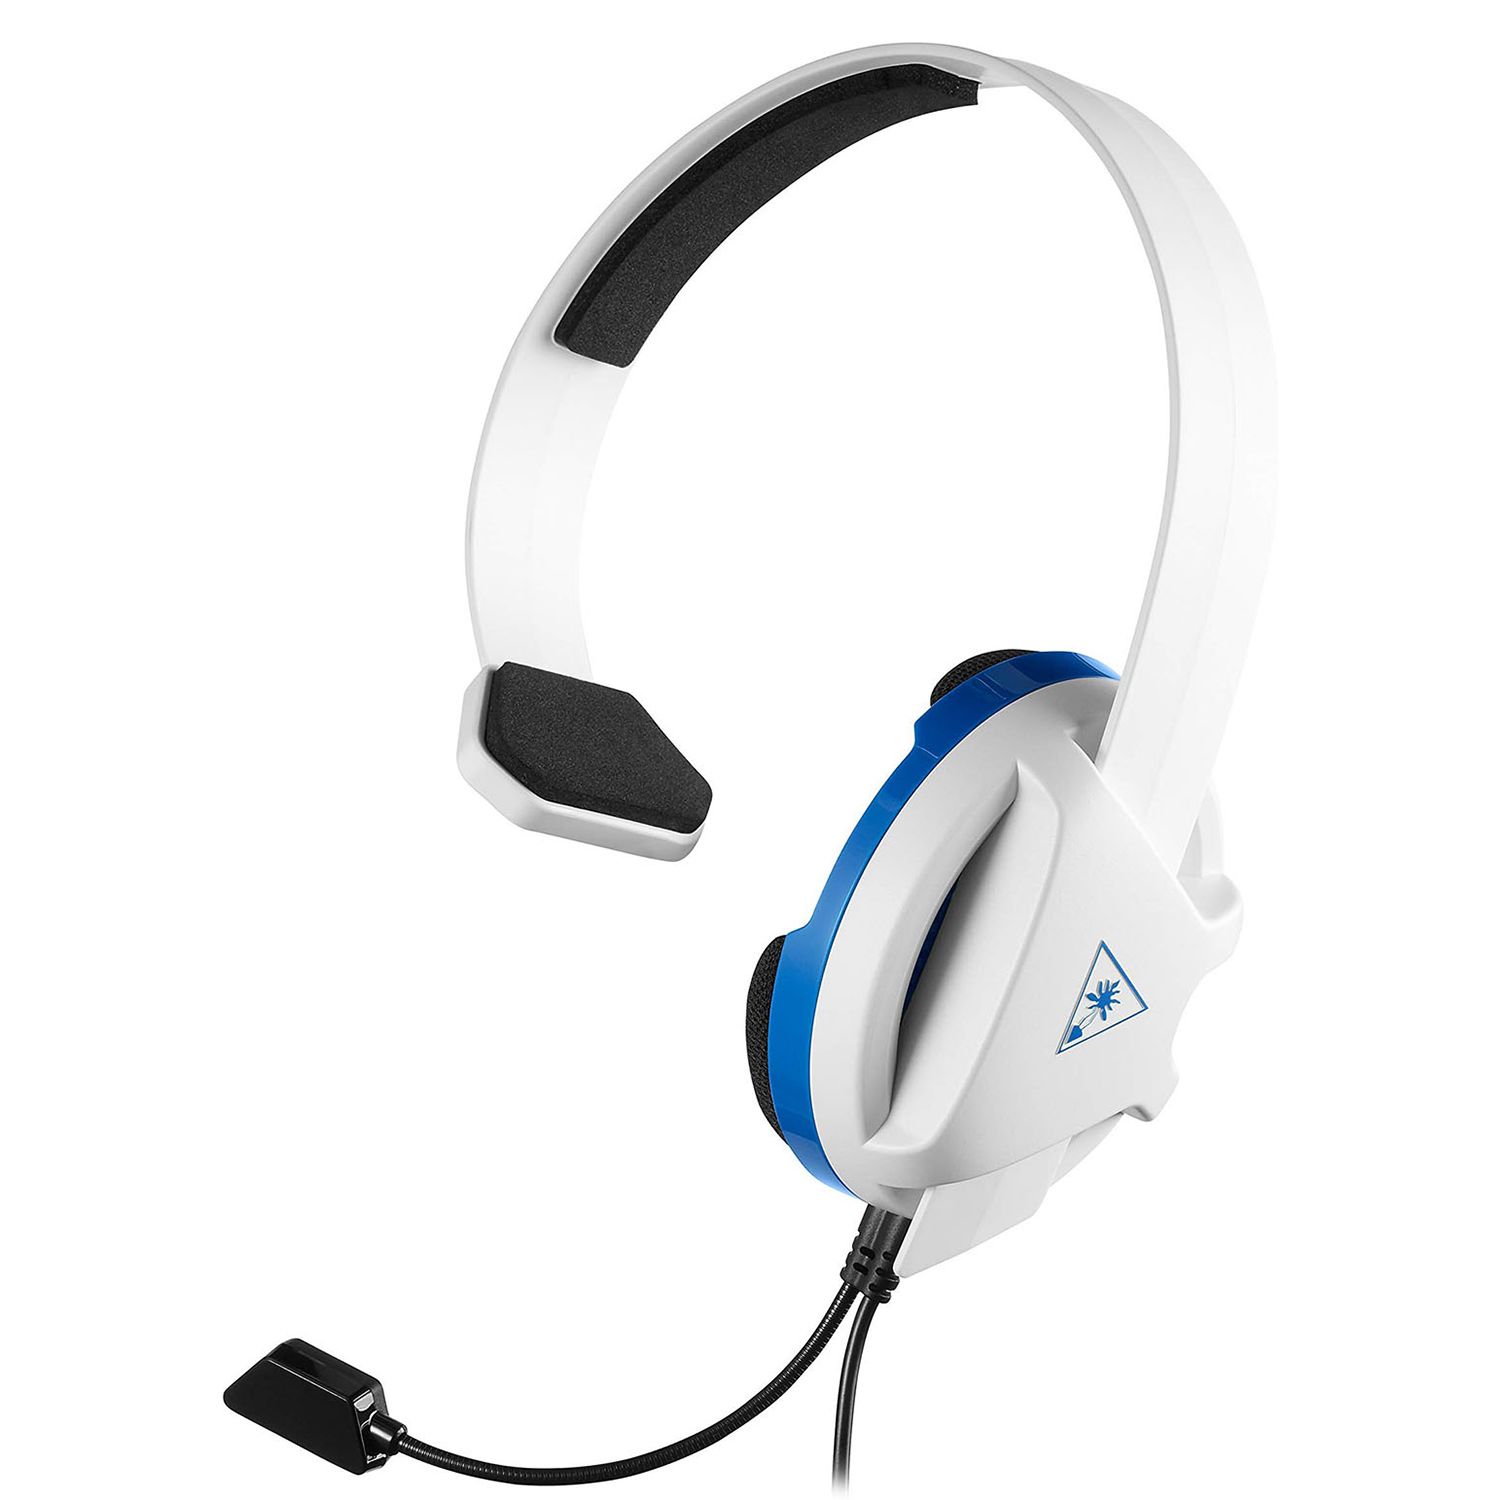 turtle headset ps4